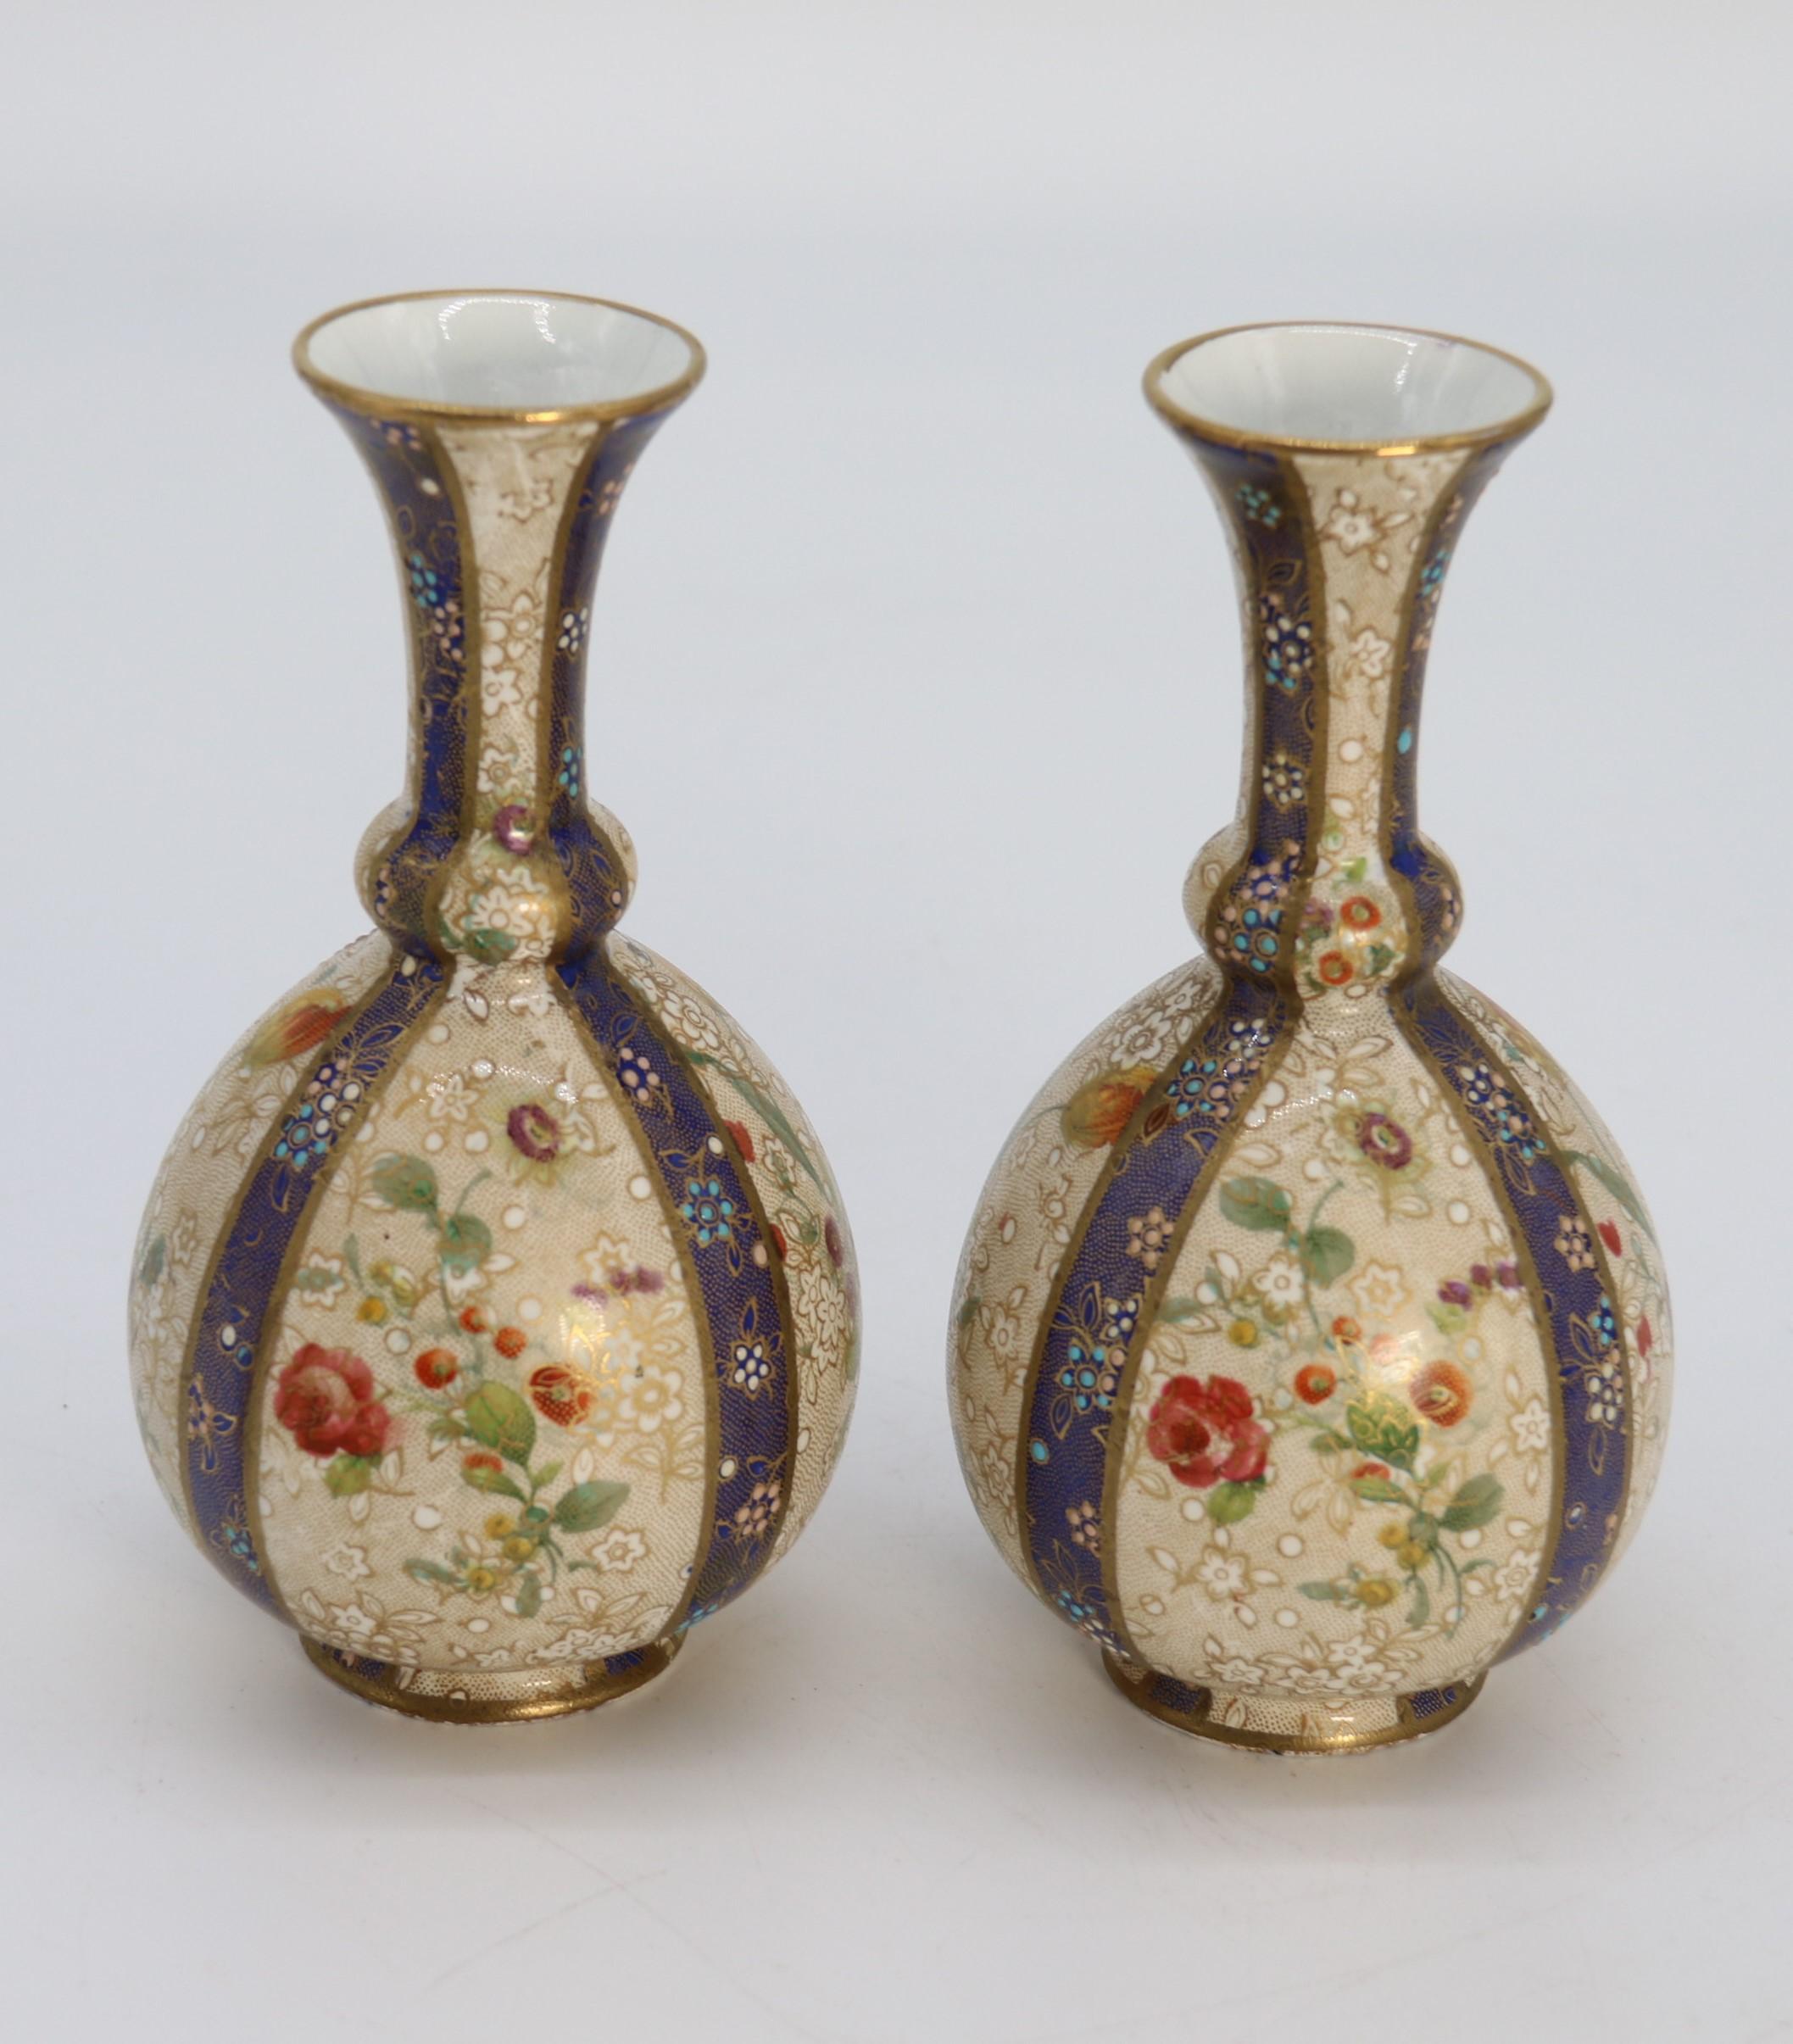 Porcelain A pair of English early Carlton Ware enamelled and gilt floral vases, circa 1900